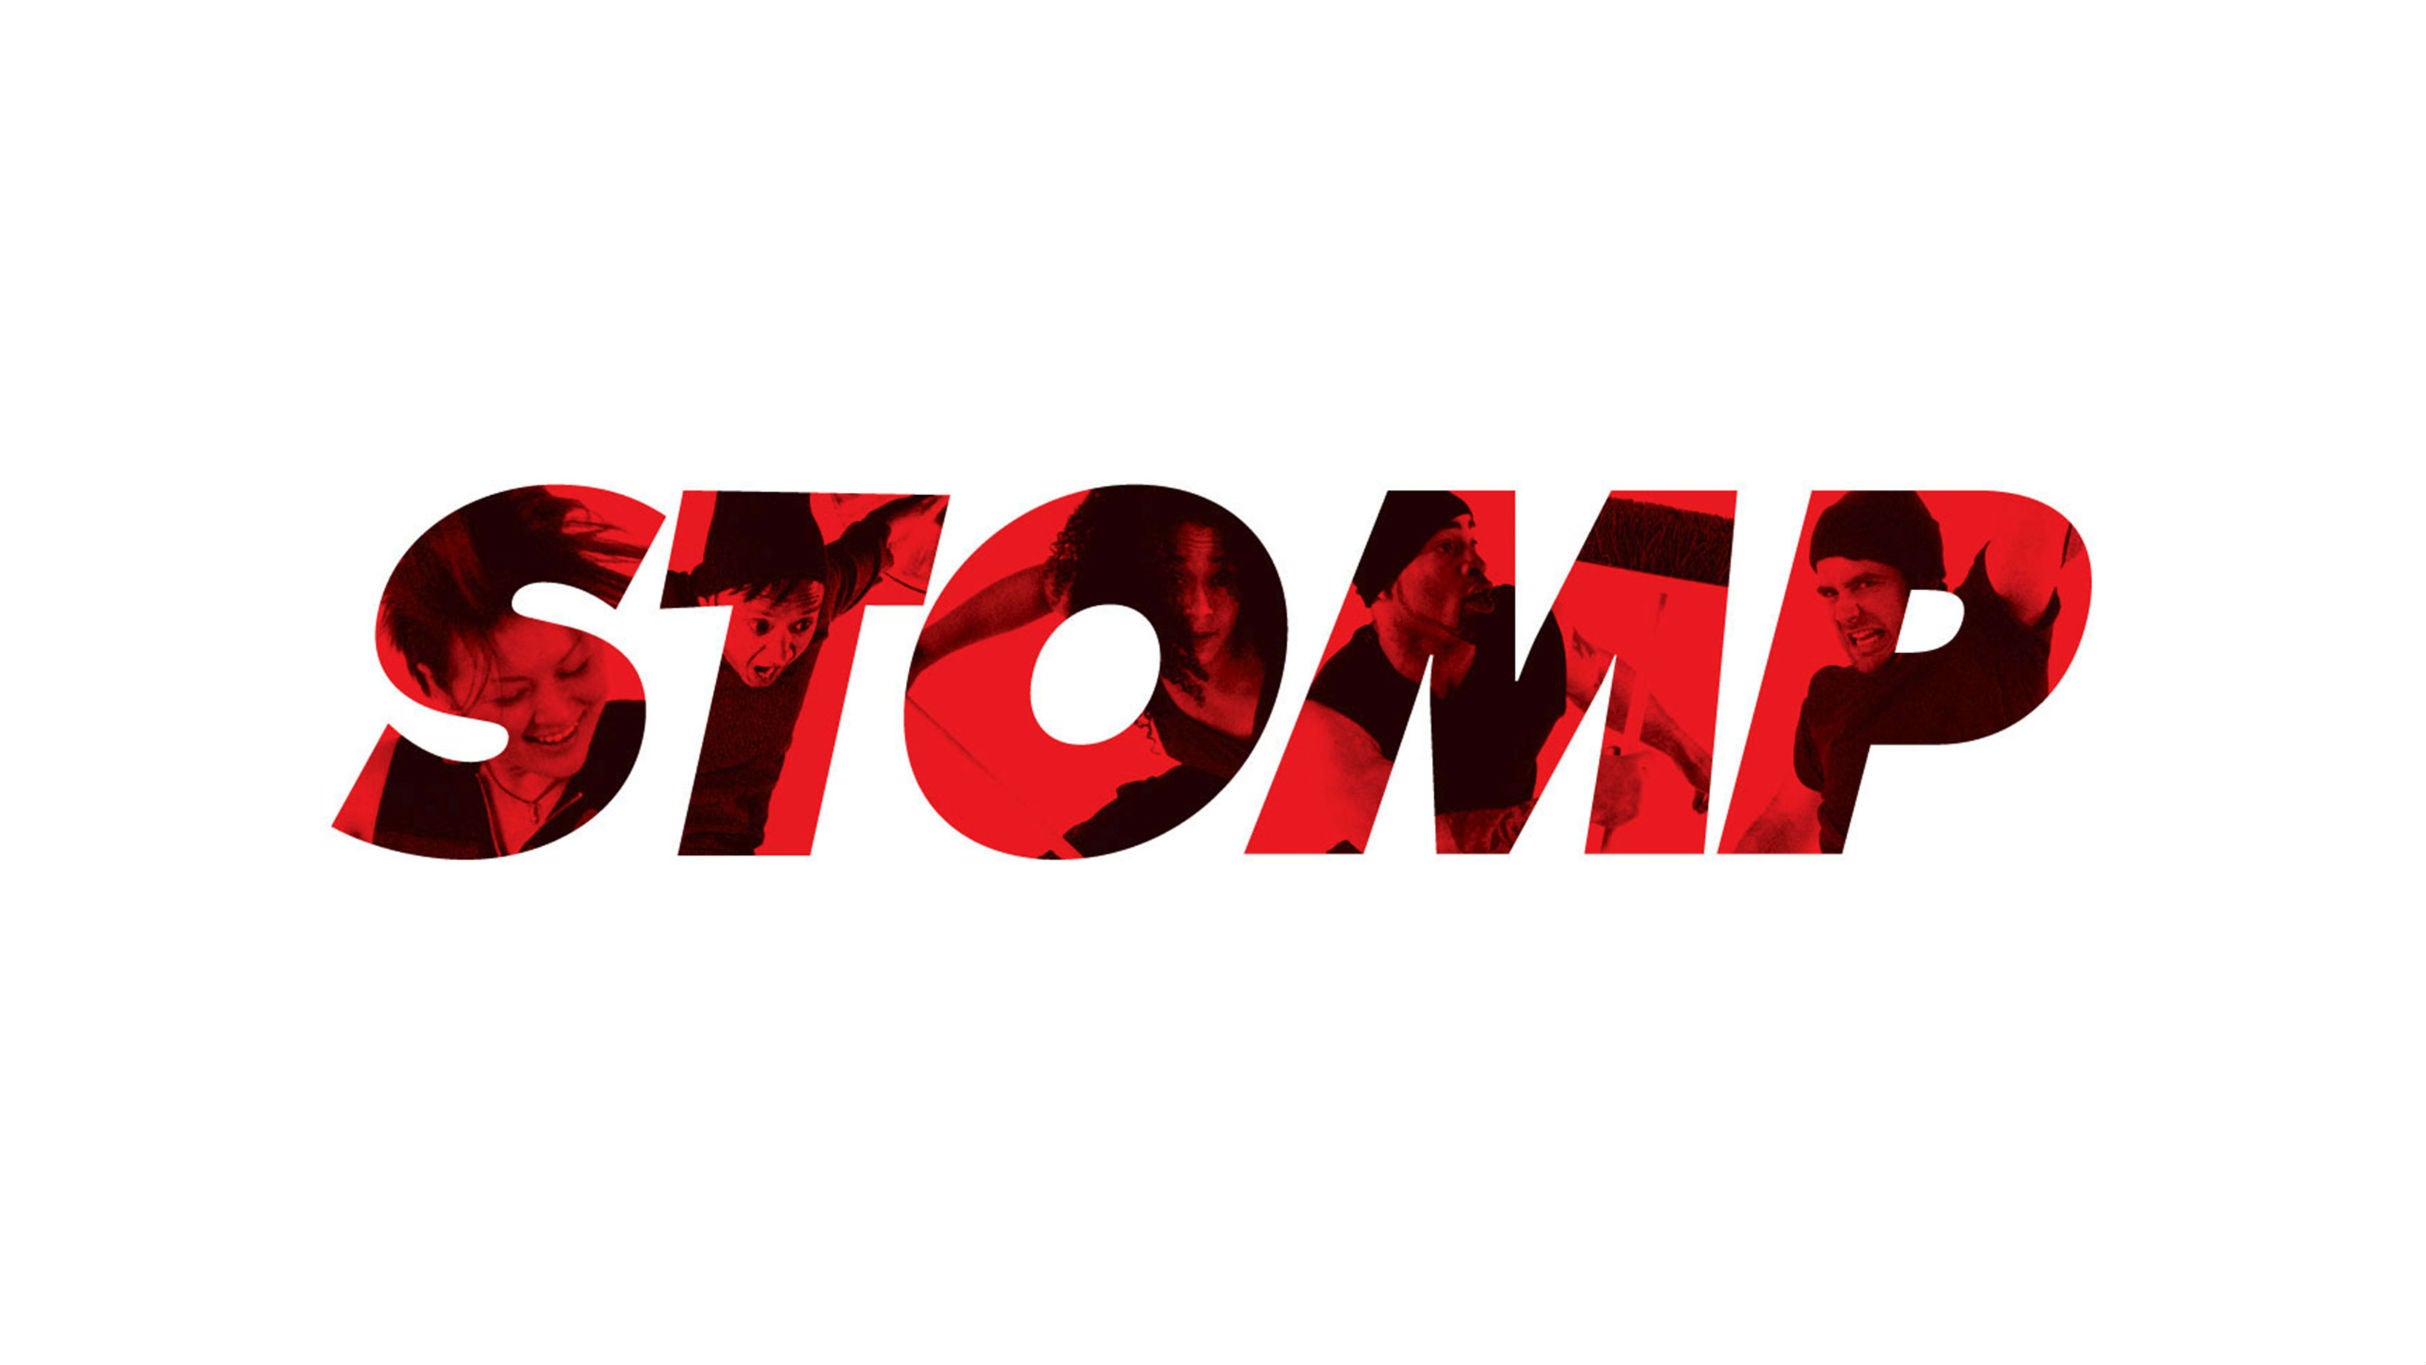 Stomp (Touring) in Baltimore promo photo for Ticketmaster presale offer code